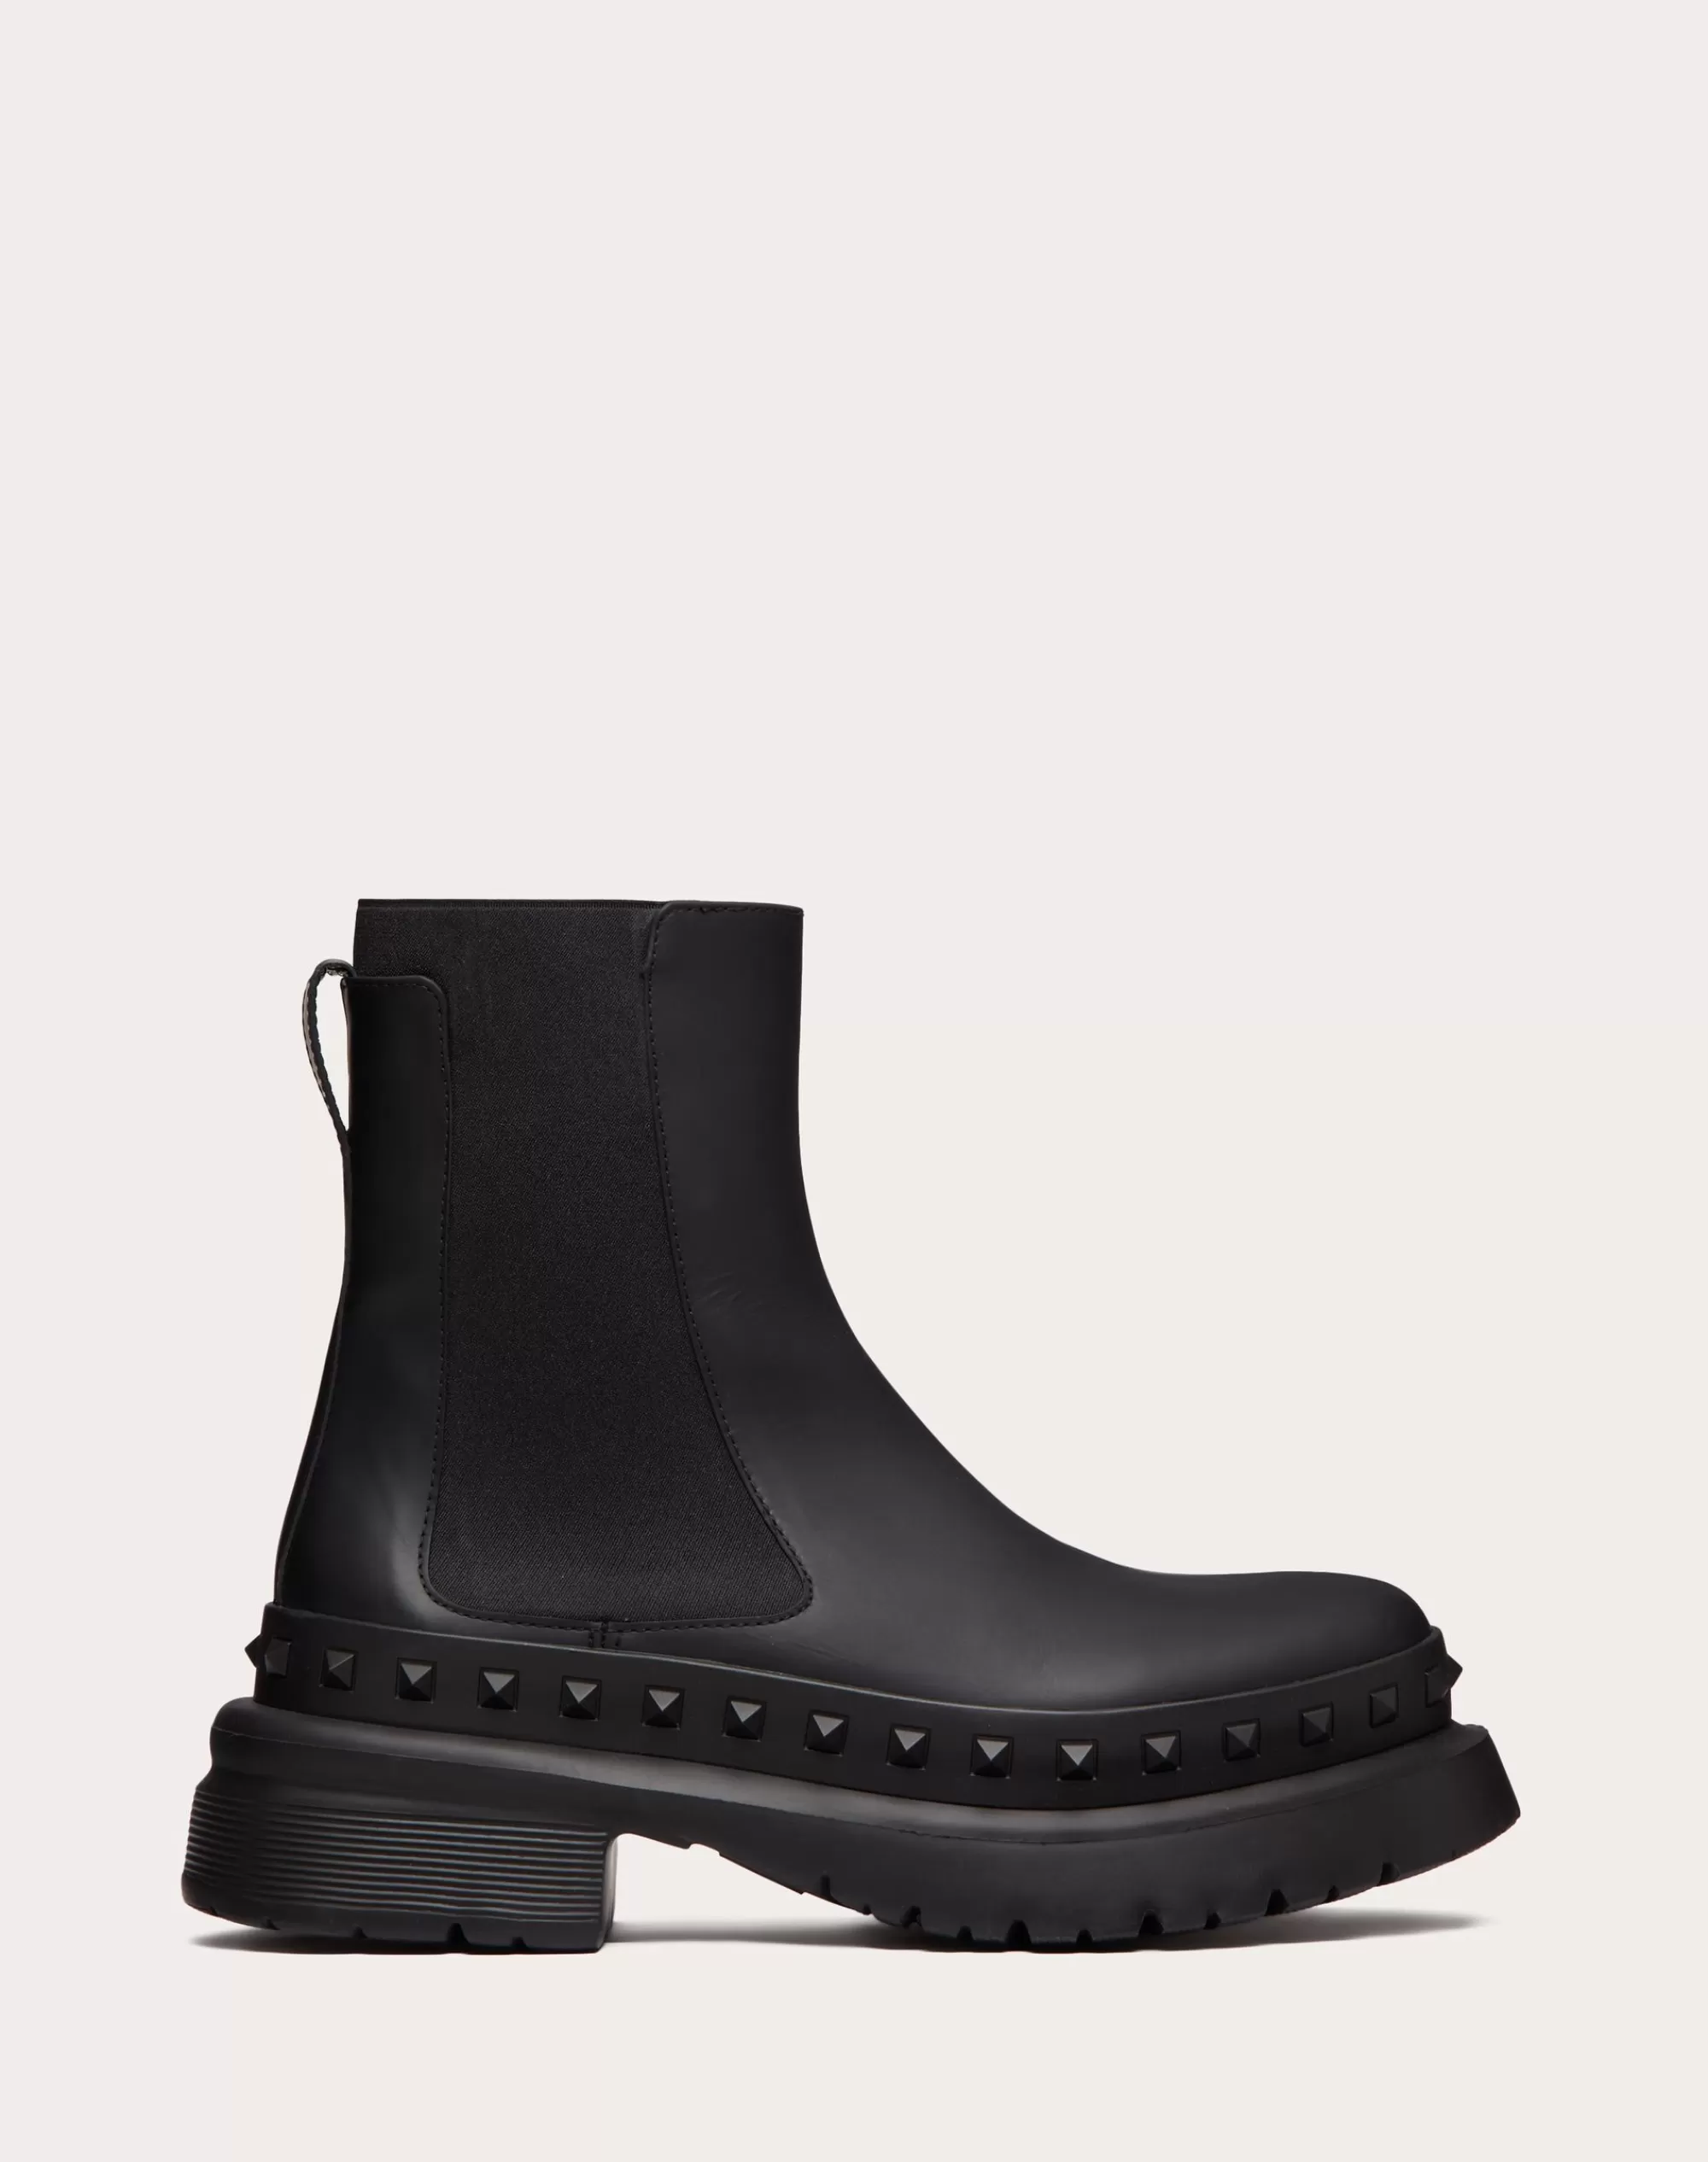 Valentino M-WAY ROCKSTUD ANKLE BOOT IN CALFSKIN LEATHER Black Outlet